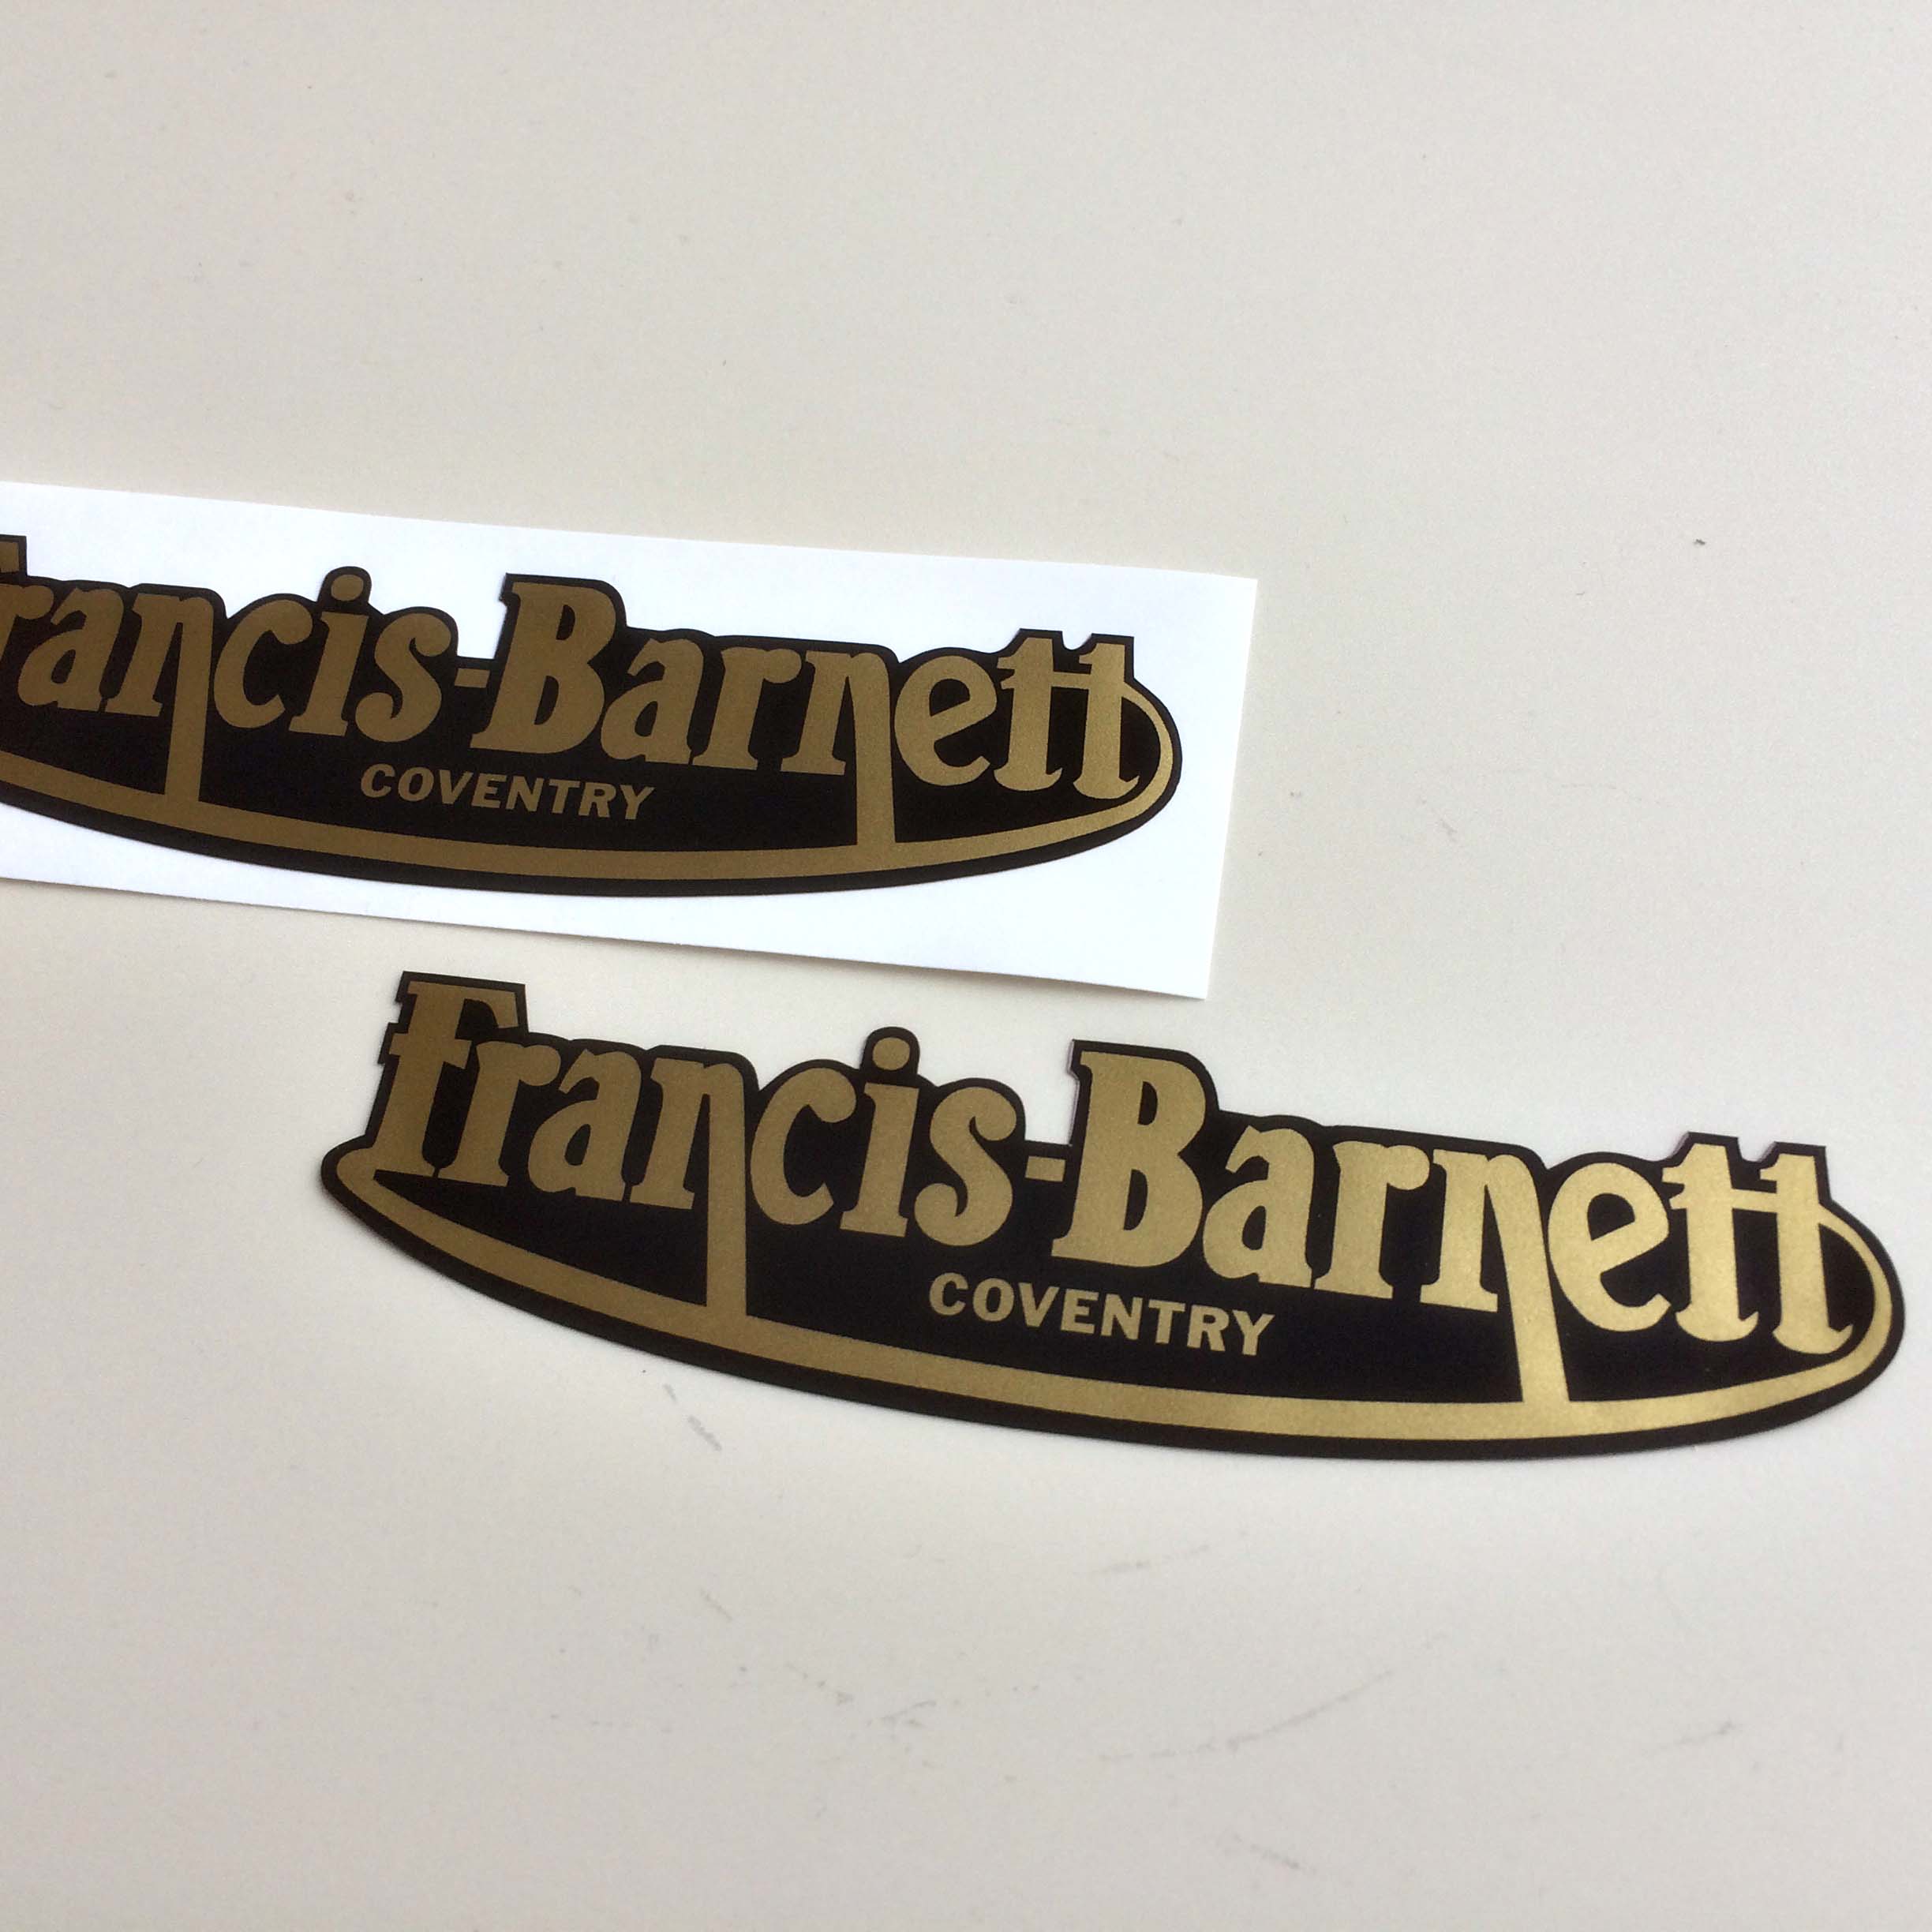 Francis-Barnett in lowercase lettering with Coventry in uppercase lettering below on a black background.